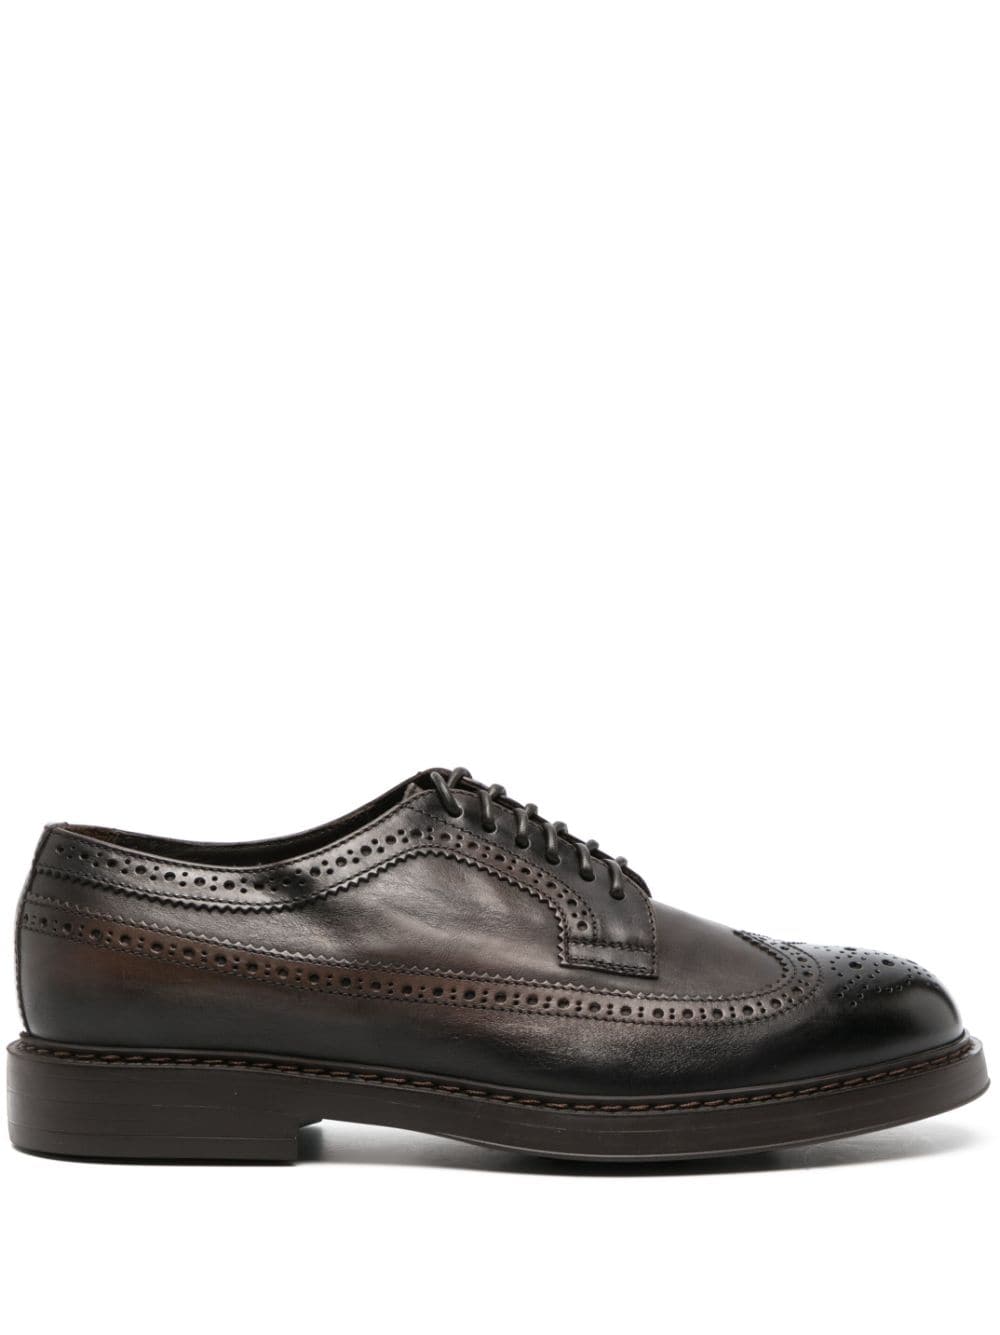 Doucal's leather lace-up Brogue shoes - Brown von Doucal's